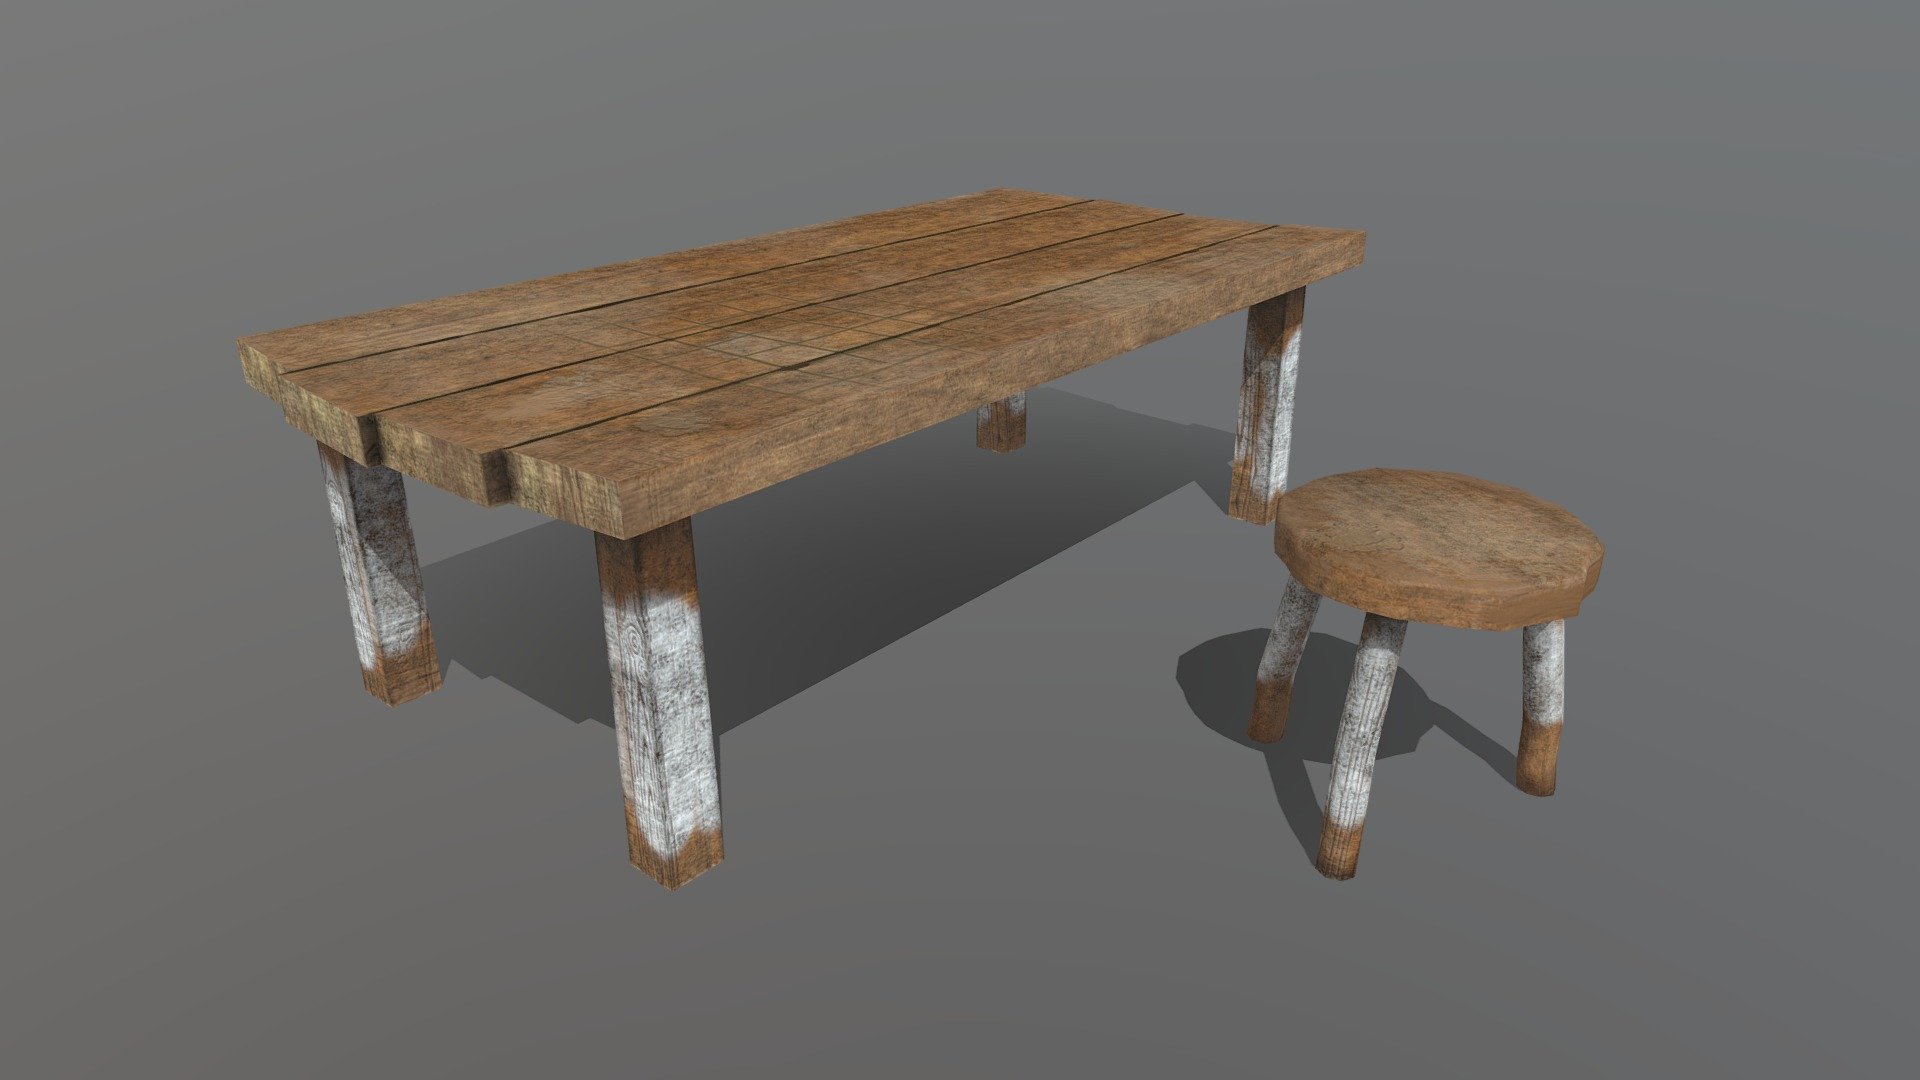 Medieval table with stool